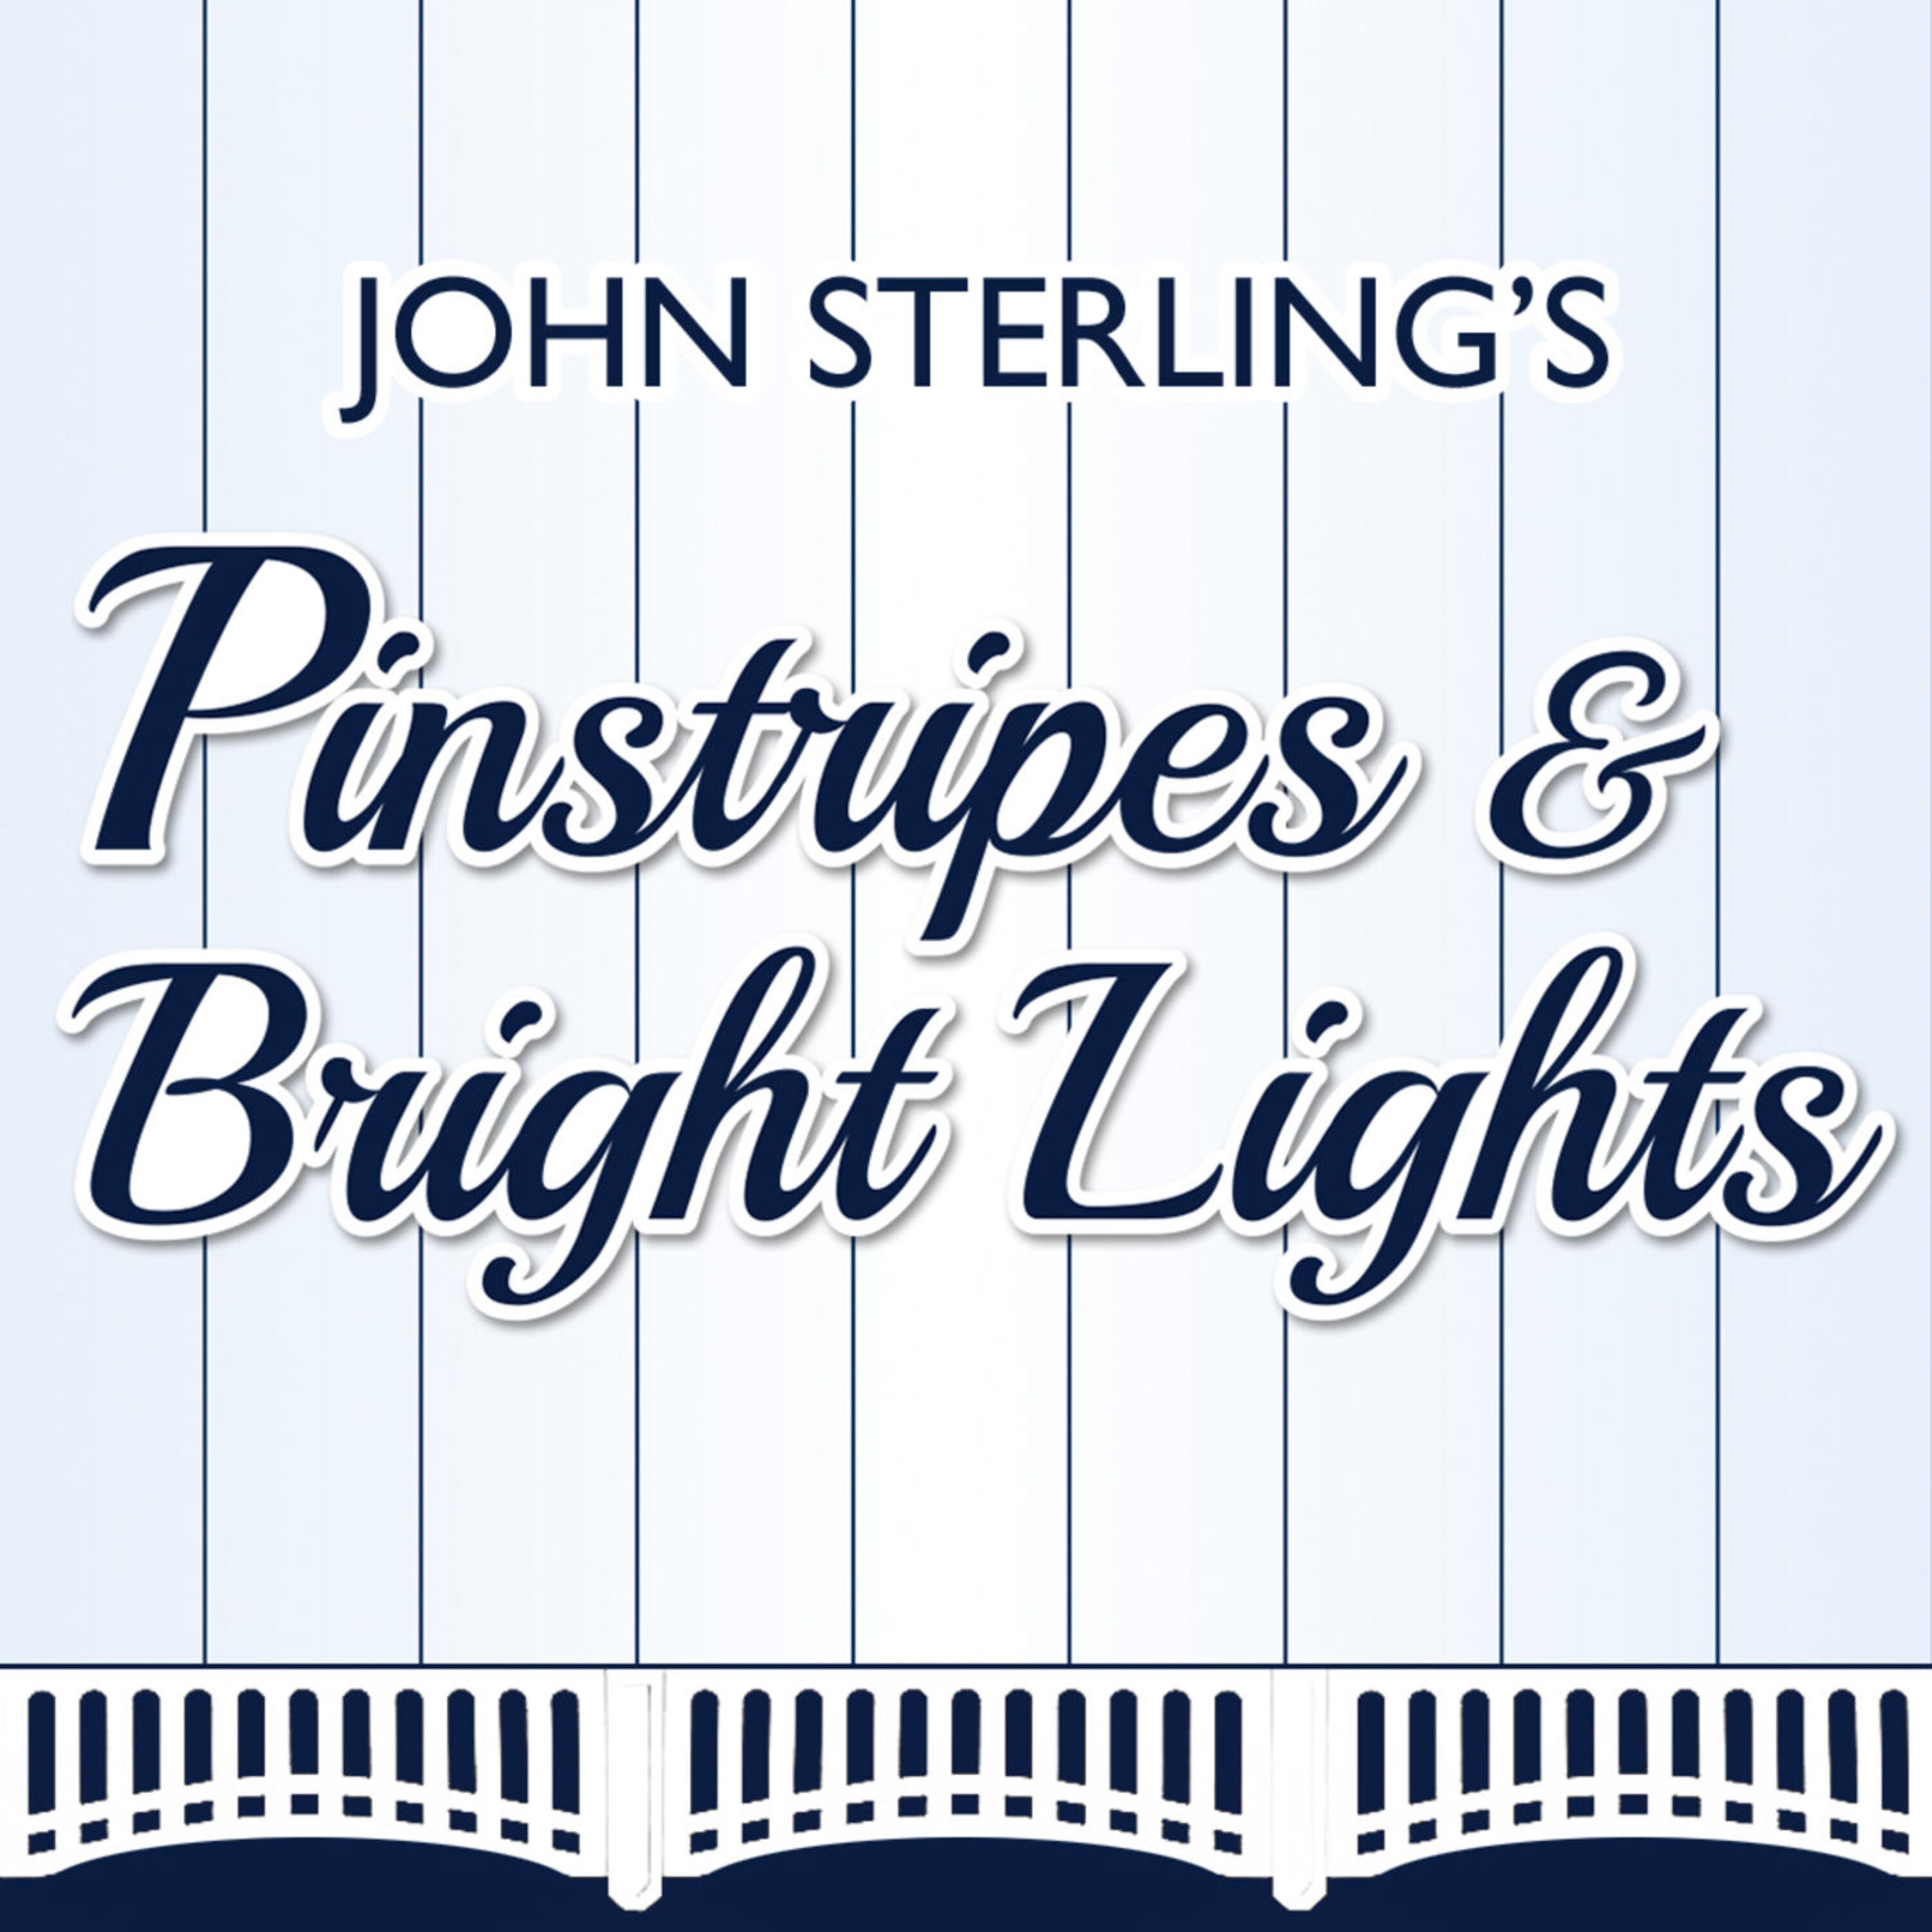 Image result for pinstripes and bright lights